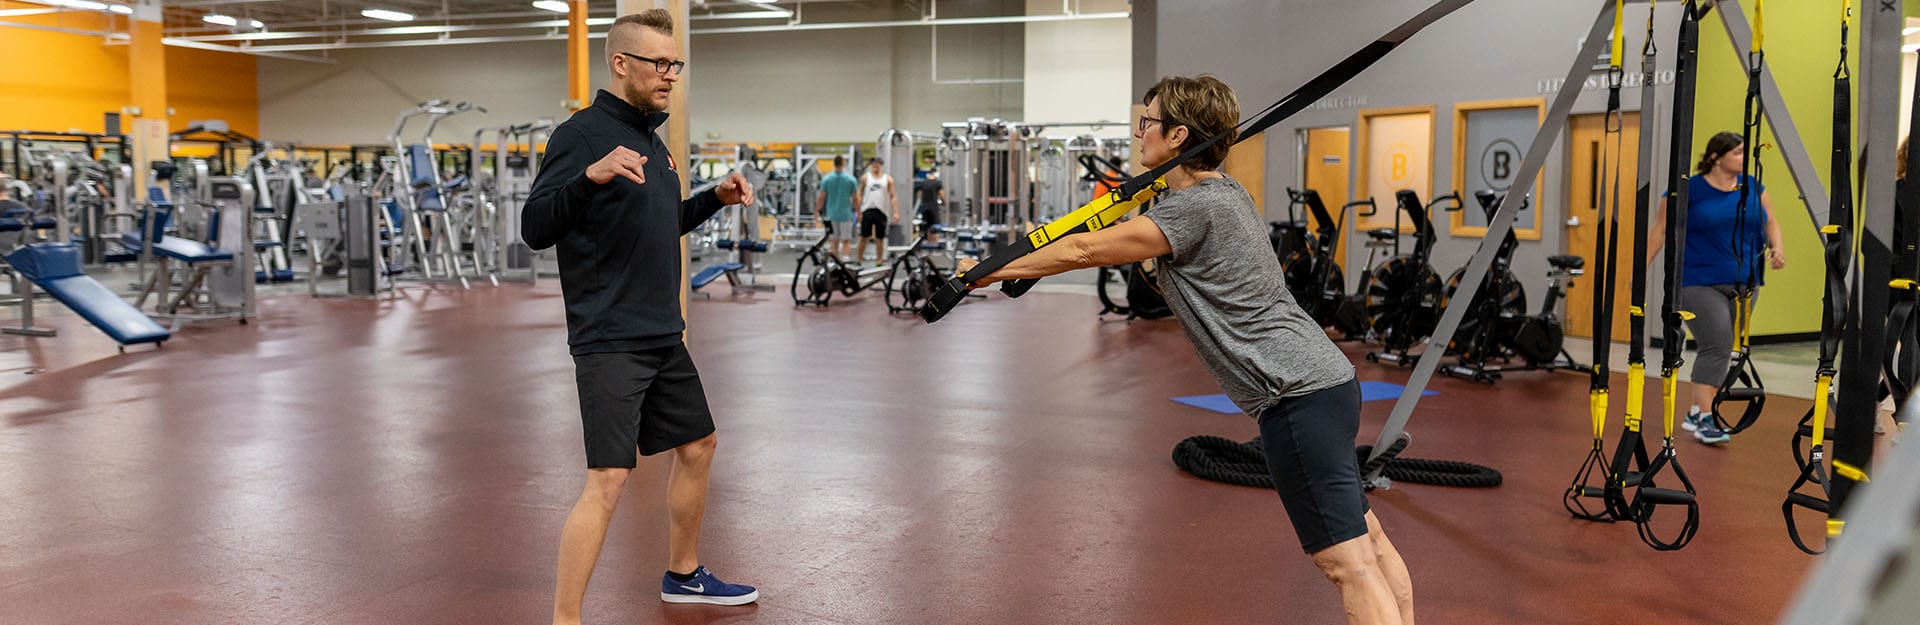 personal trainer coaching a gym member on trx bands